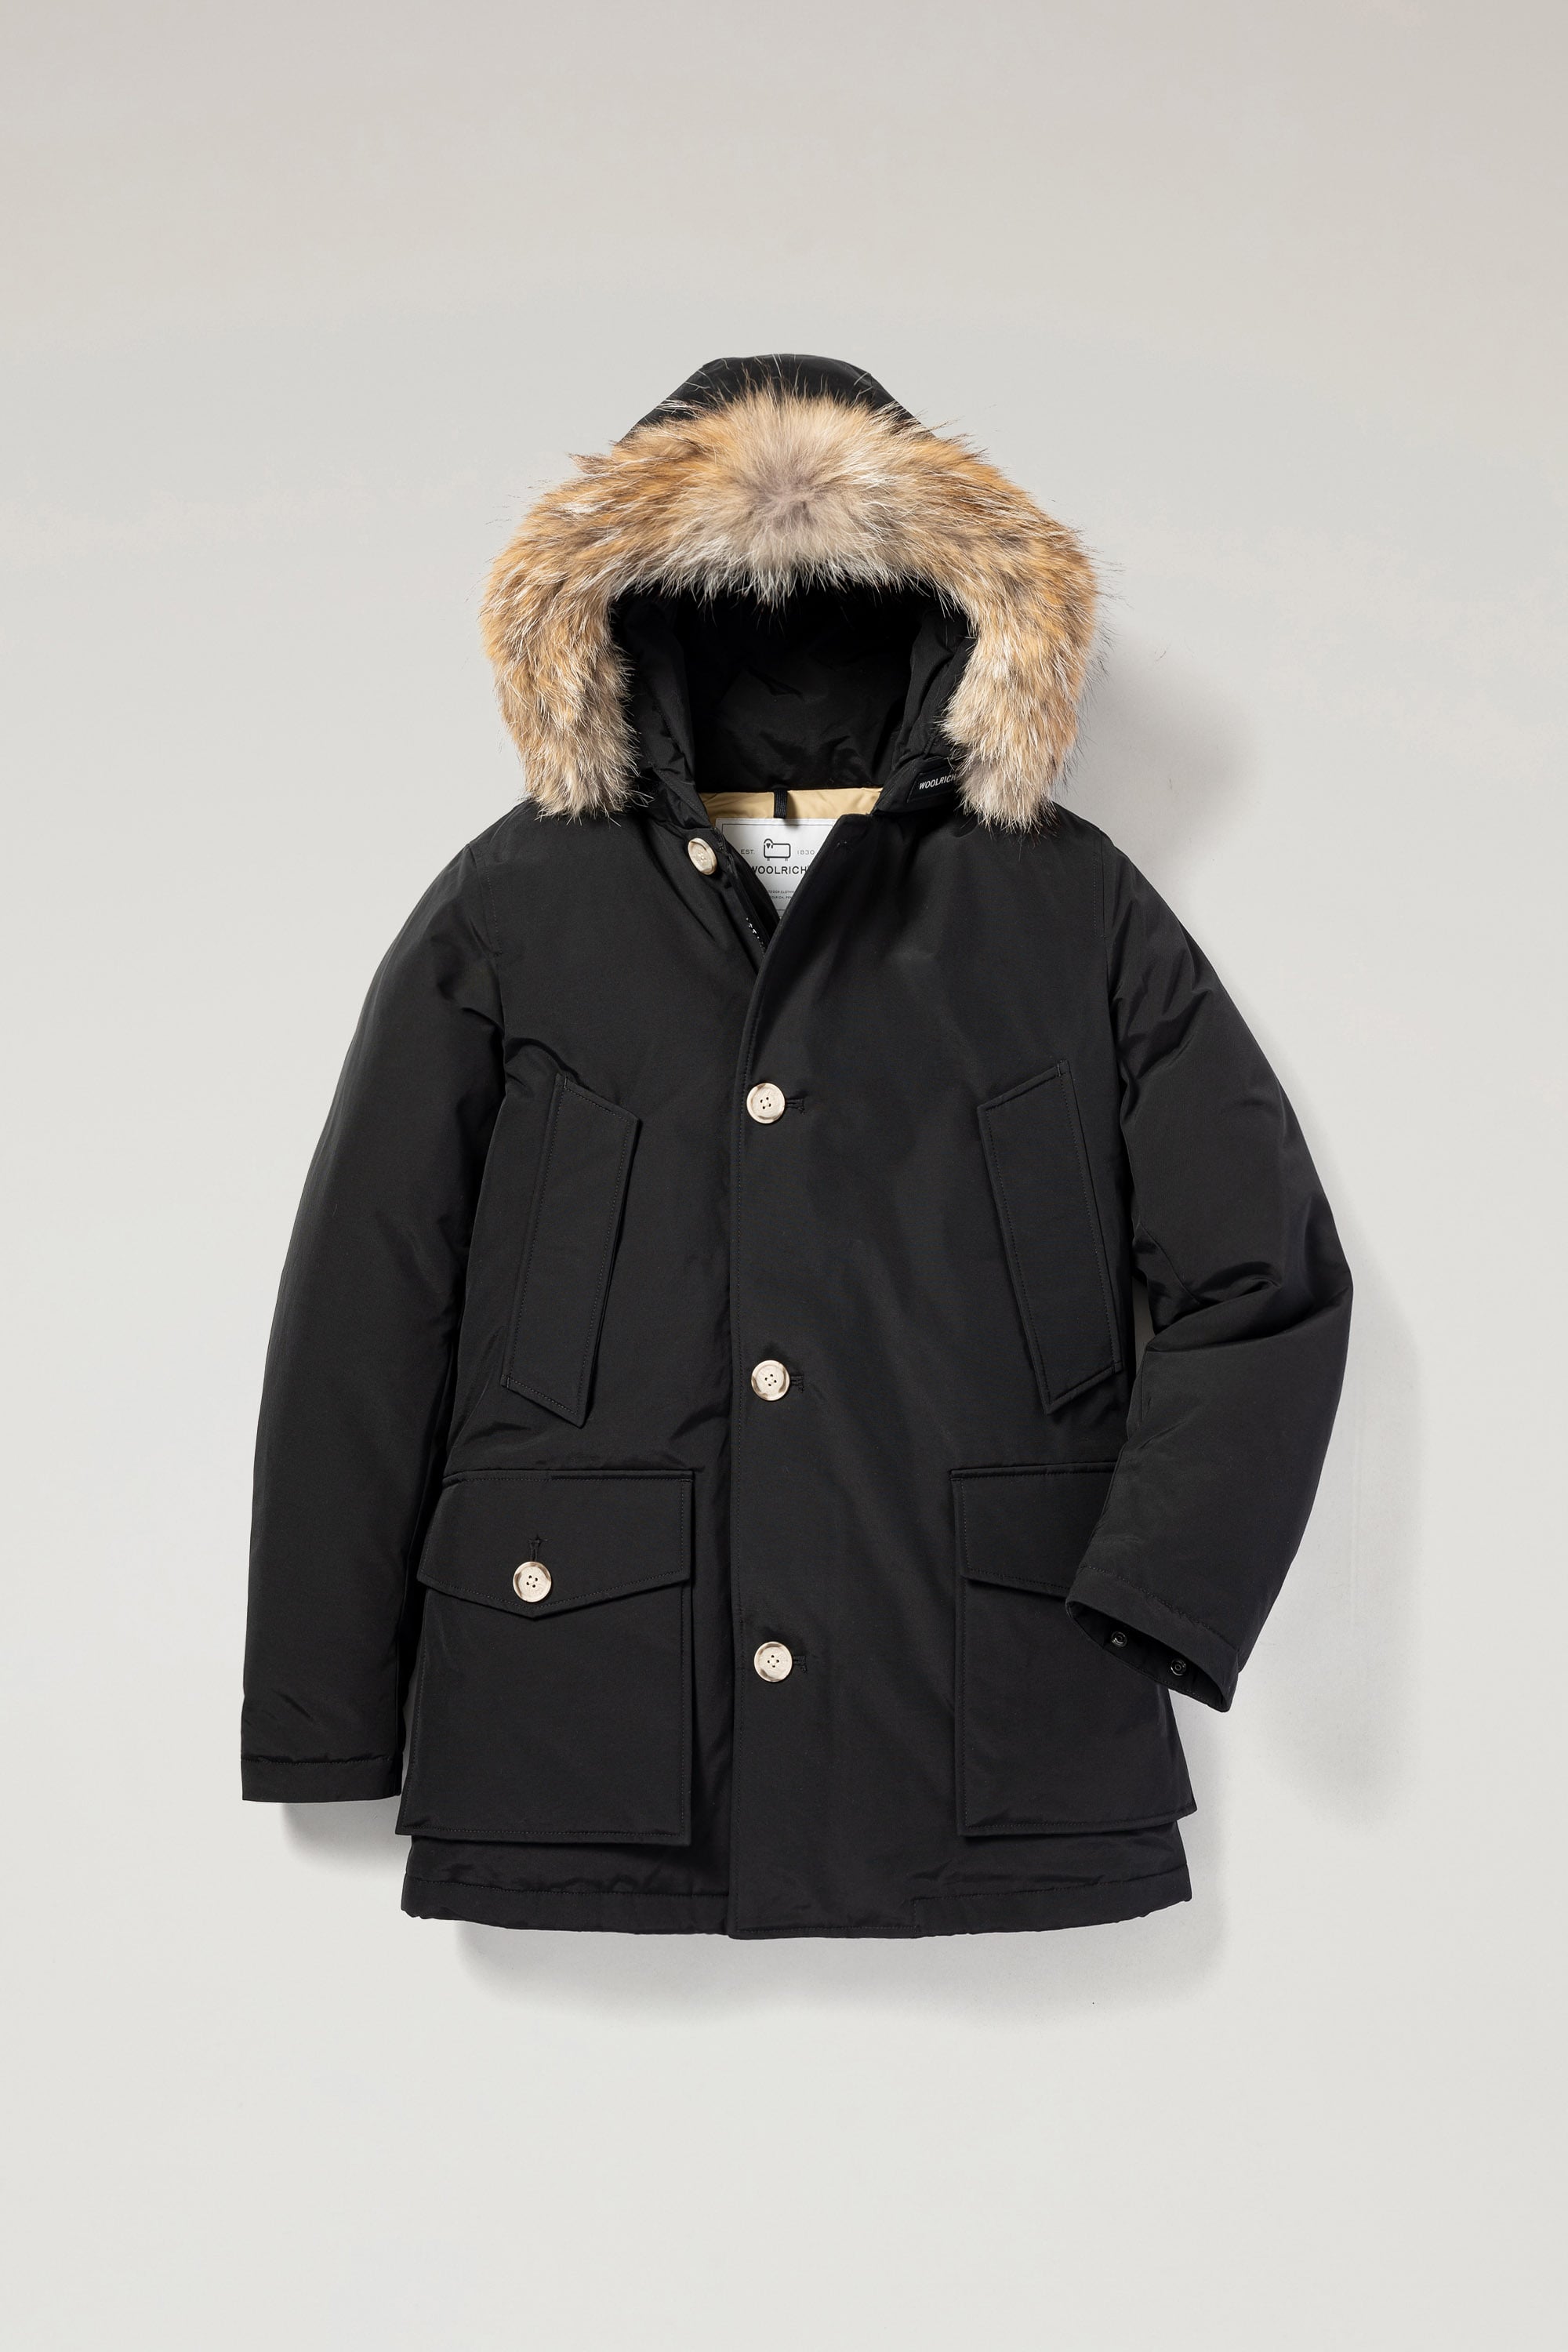 NEW ARCTIC PARKA｜WOOLRICH（ウールリッチ）公式